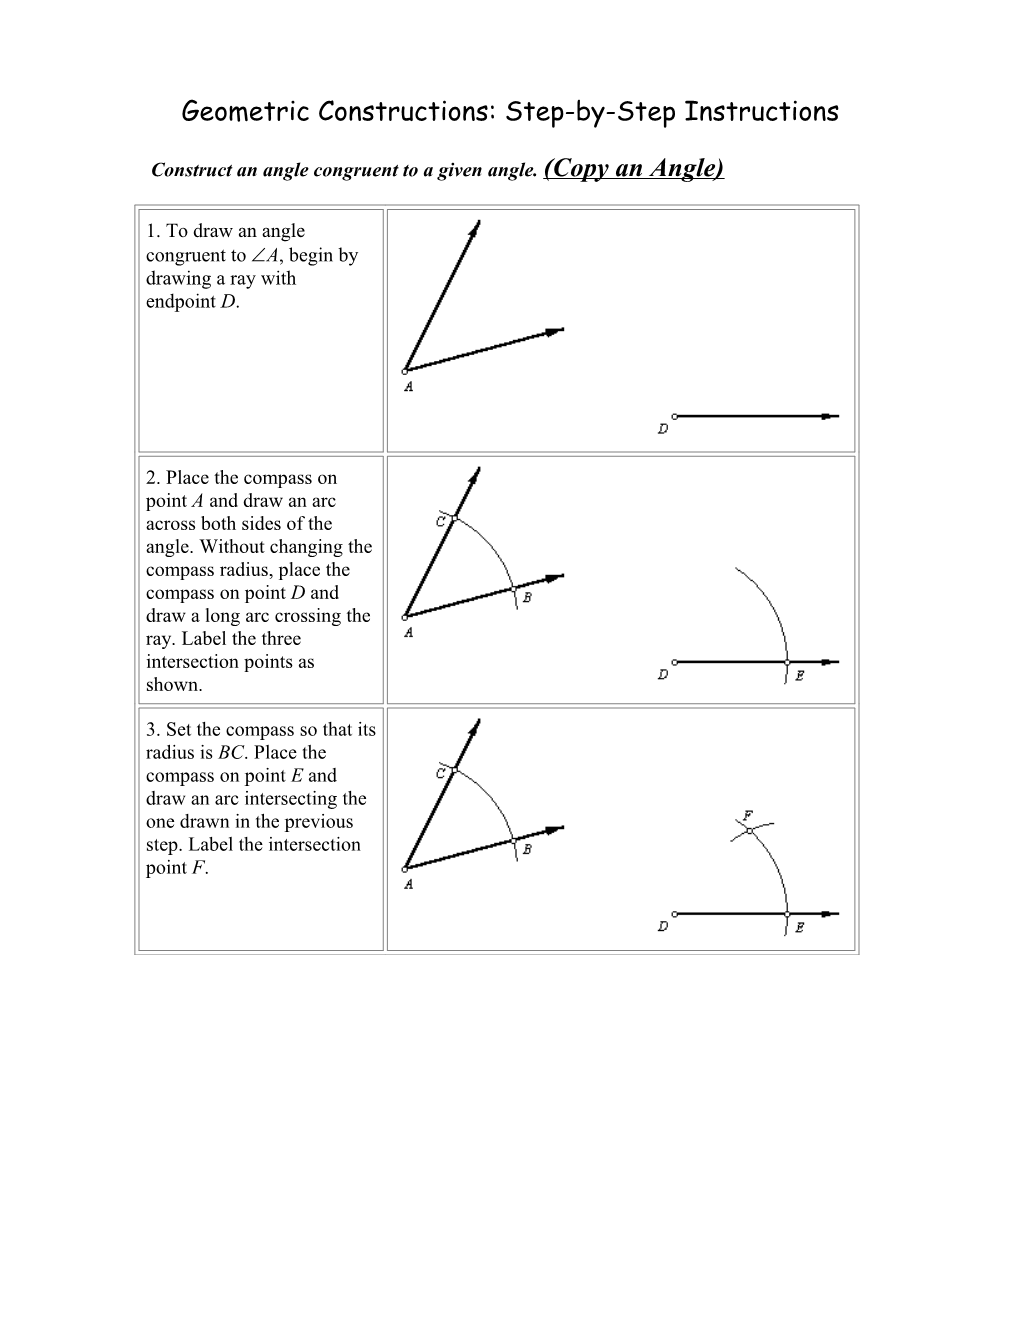 Geometric Constructions: Step-By-Step Instructions